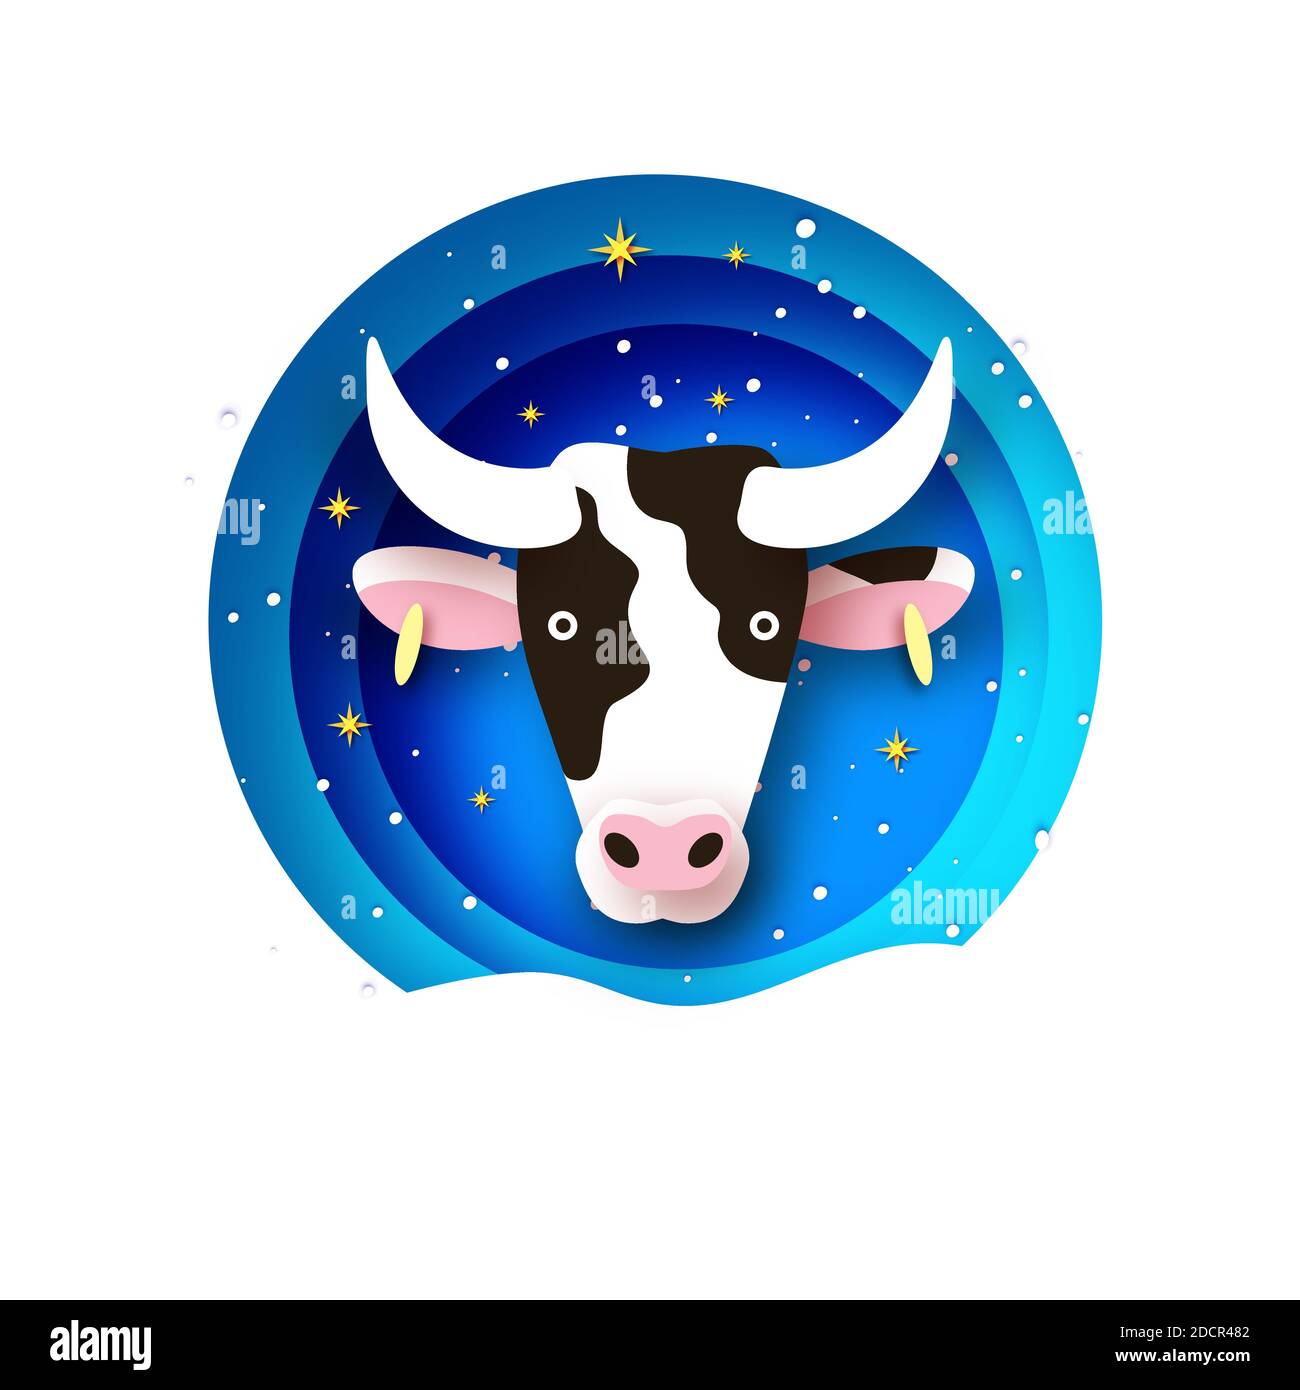 Bull New Year. Happy New Year. Bull, ox, cow. 2021 Lunar horoscope sign in paper cut style. Blue tunnel. Winter holidays. Stock Vector